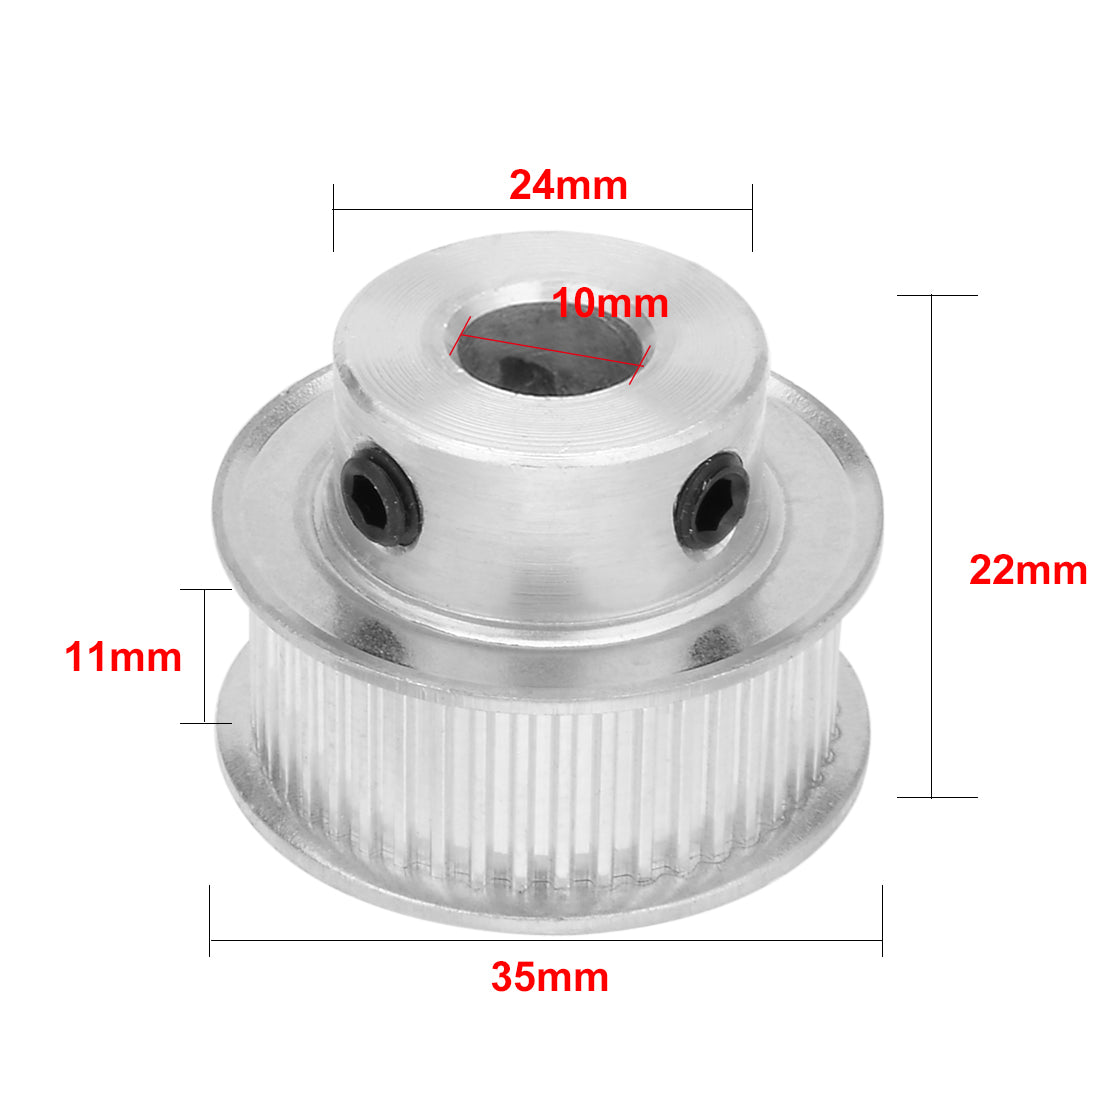 uxcell Uxcell Aluminum M-X-L 45 Teeth 10mm Bore Timing Belt Idler Pulley Synchronous Wheel 10mm Belt for 3D Printer CNC